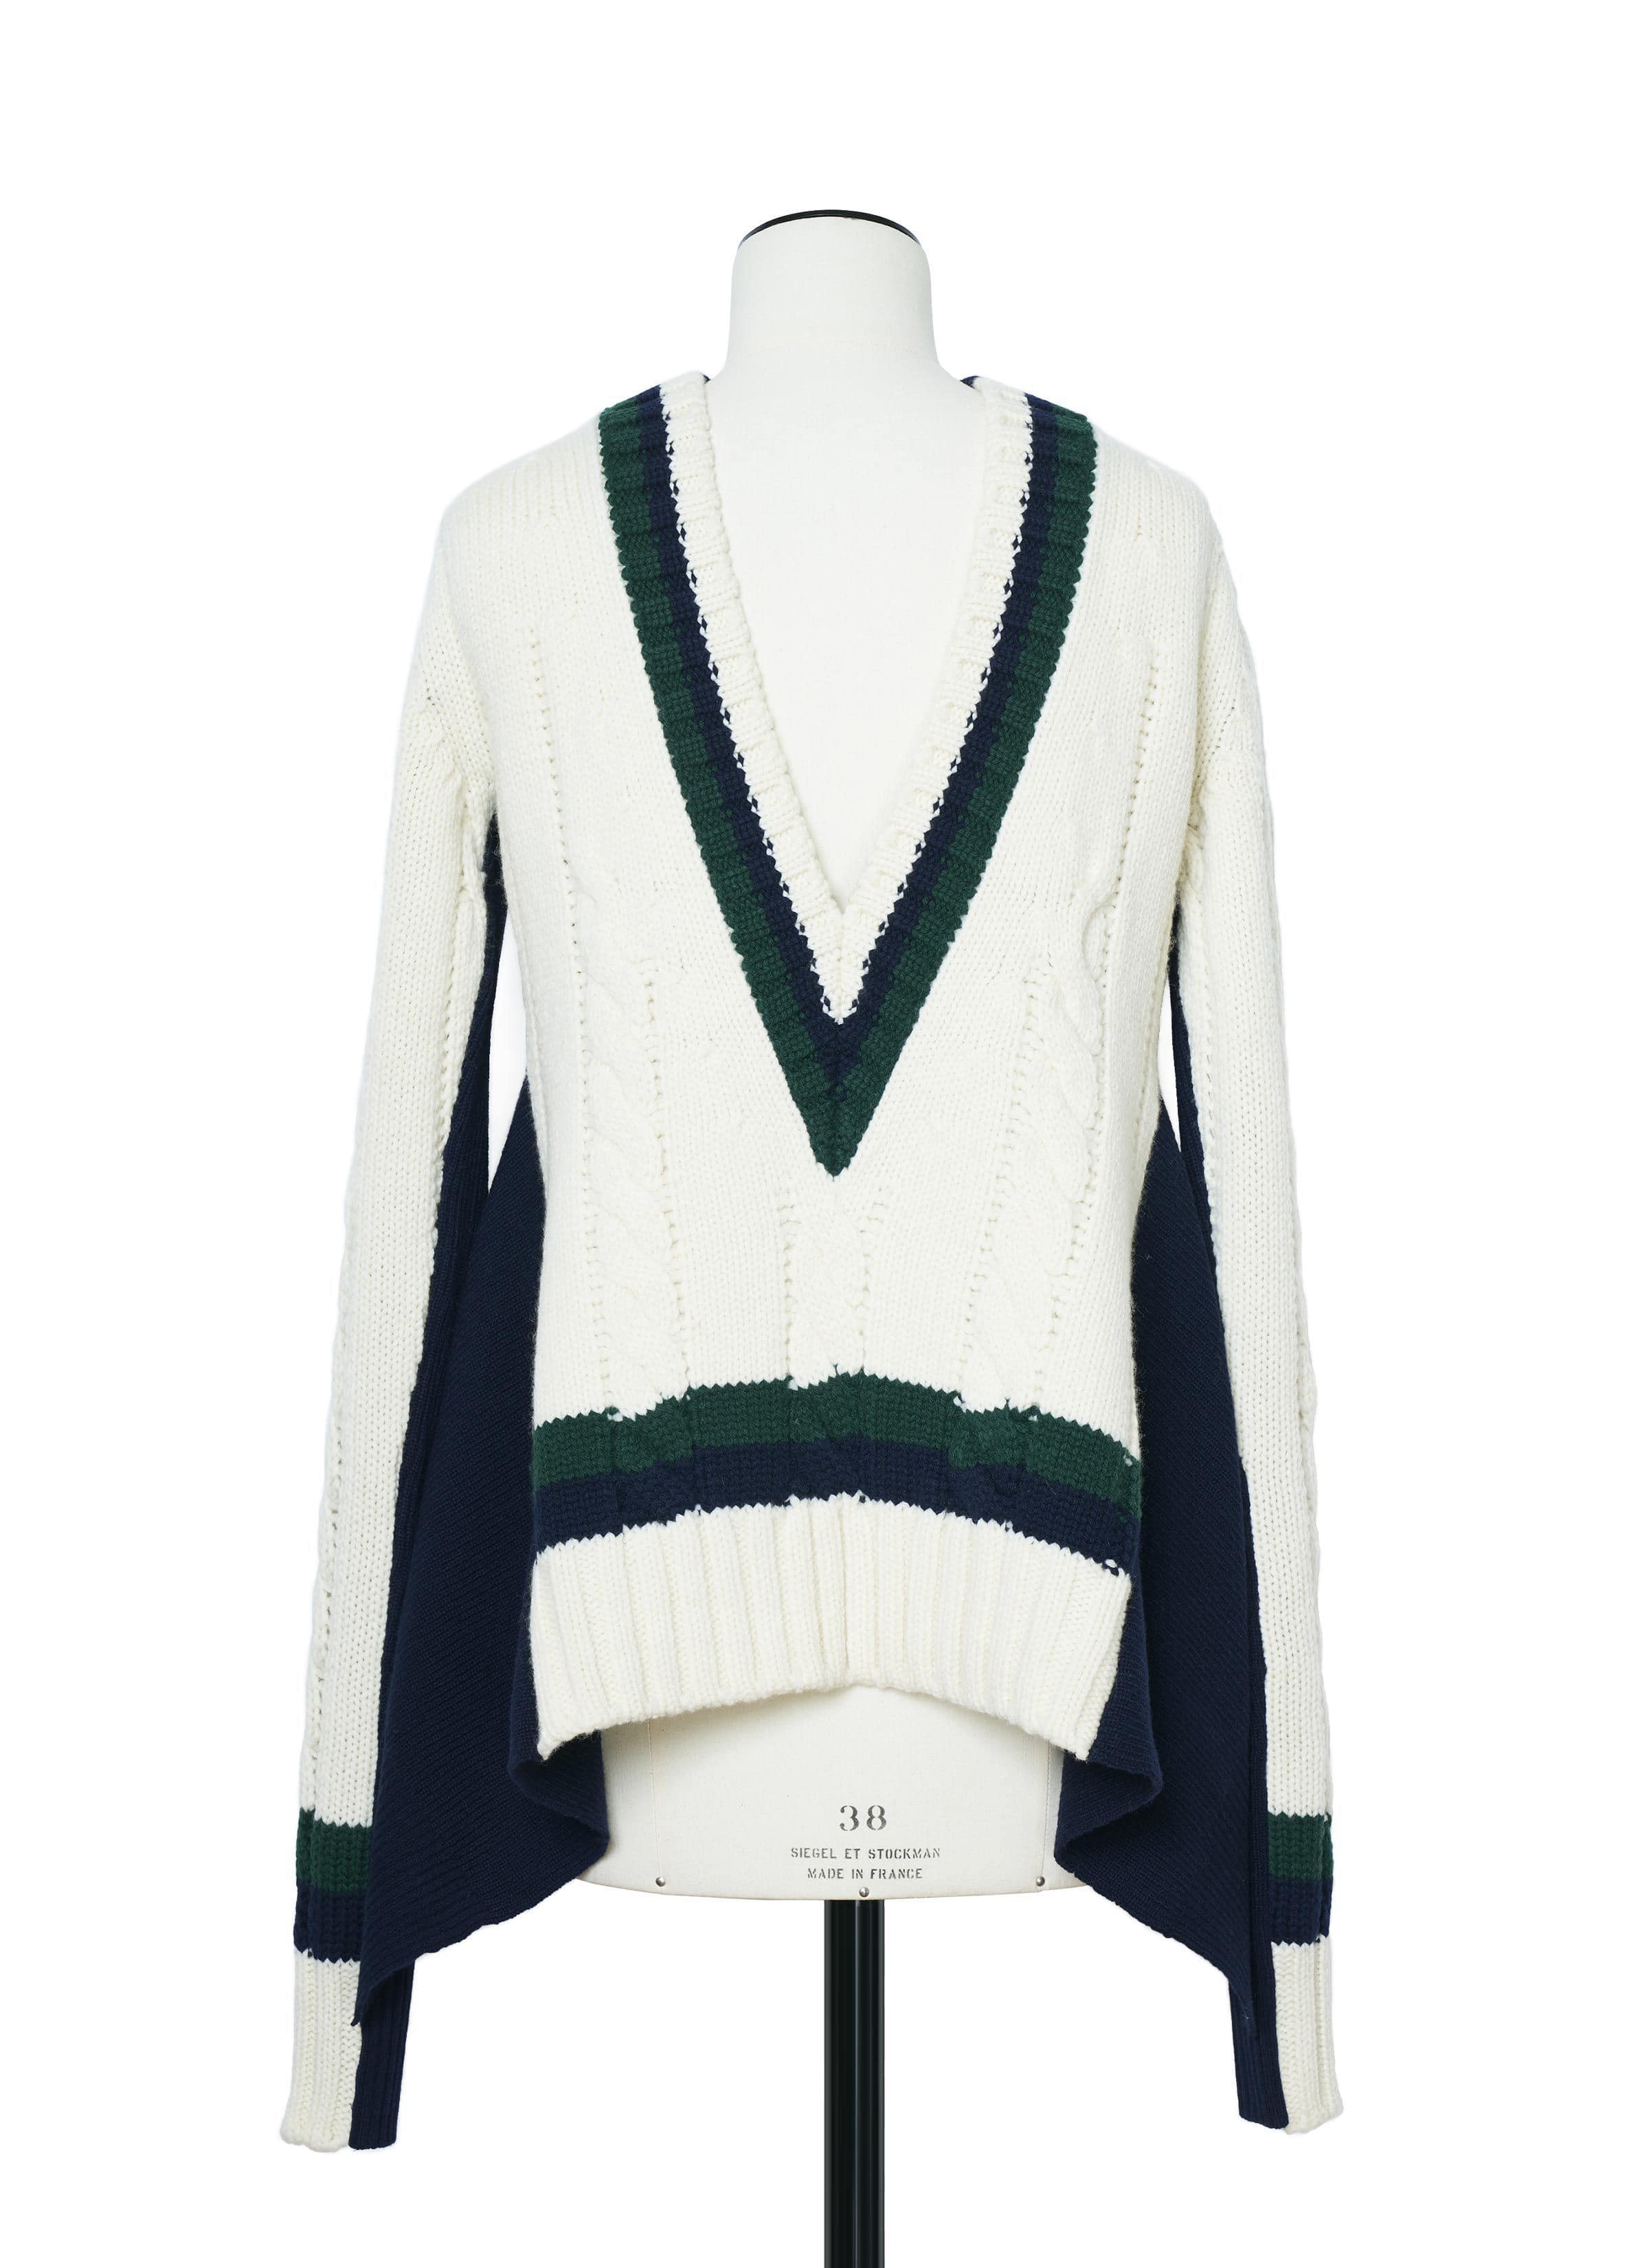 Wool Knit Pullover 詳細画像 NAVY×OFF WHITE 3